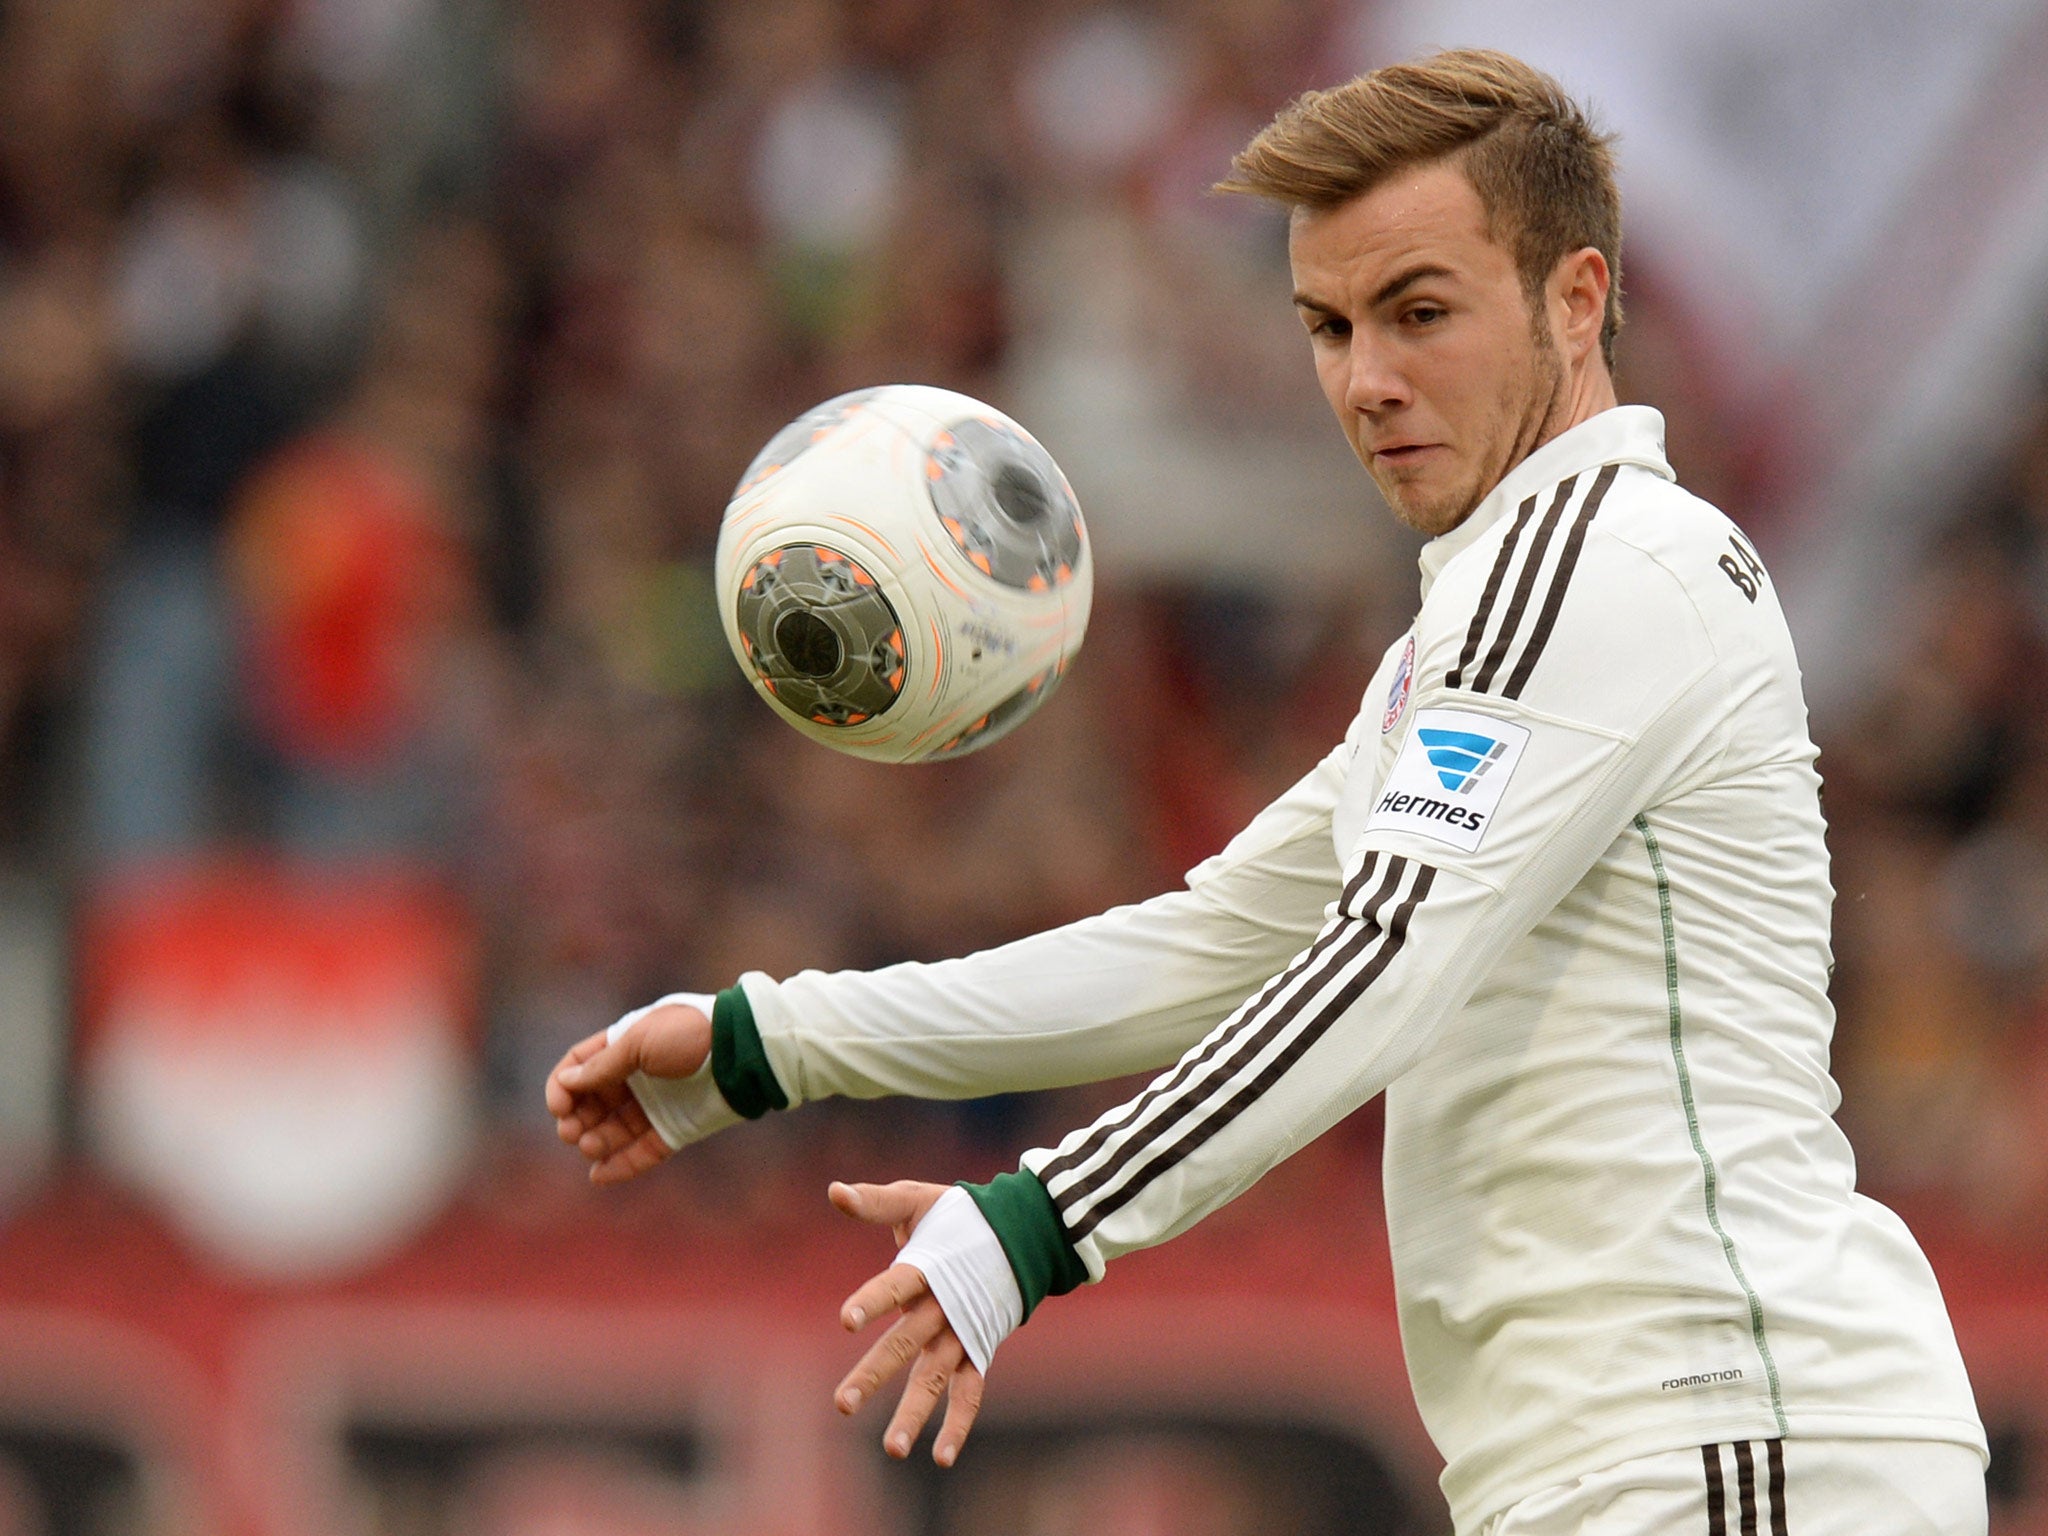 Germany’s young star has made an impressive start since switching from Dortmund to Bayern last summer. Gotze has scored three times in the Champions League this year and will be pushing to make a starting place his own with some key injures in the Bayern